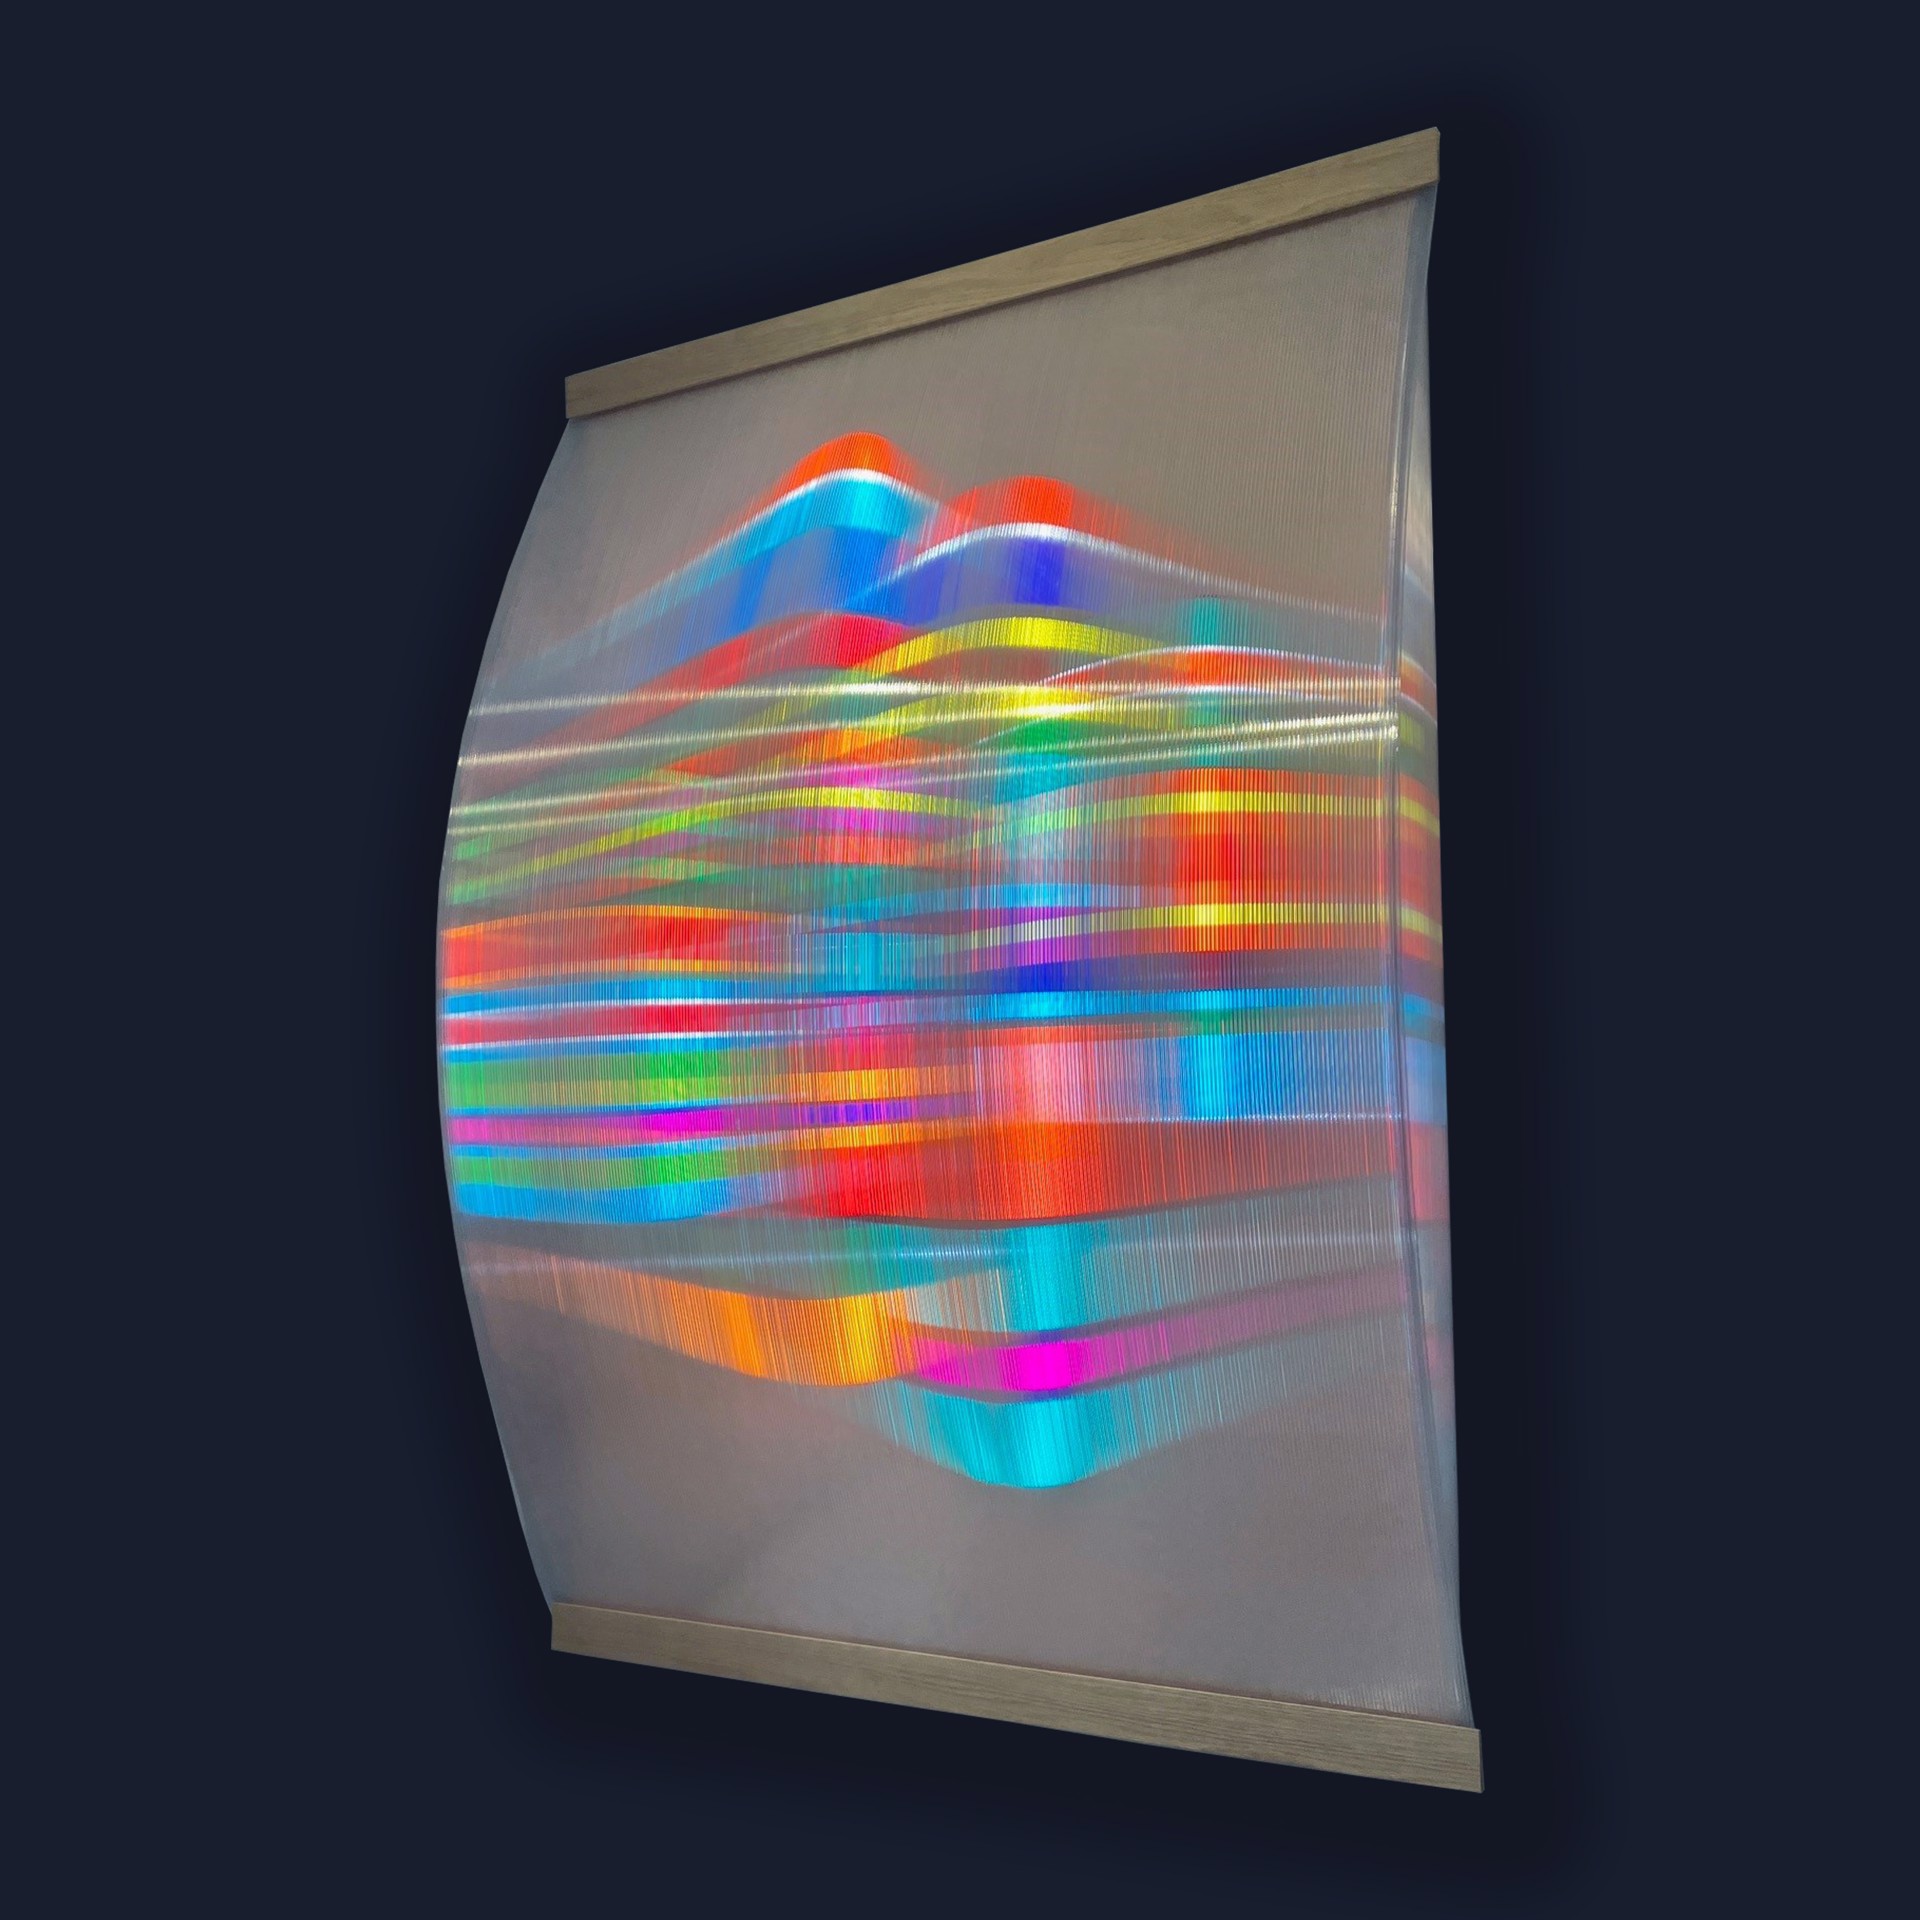 Diffraction Panel #4 by Martin Cail